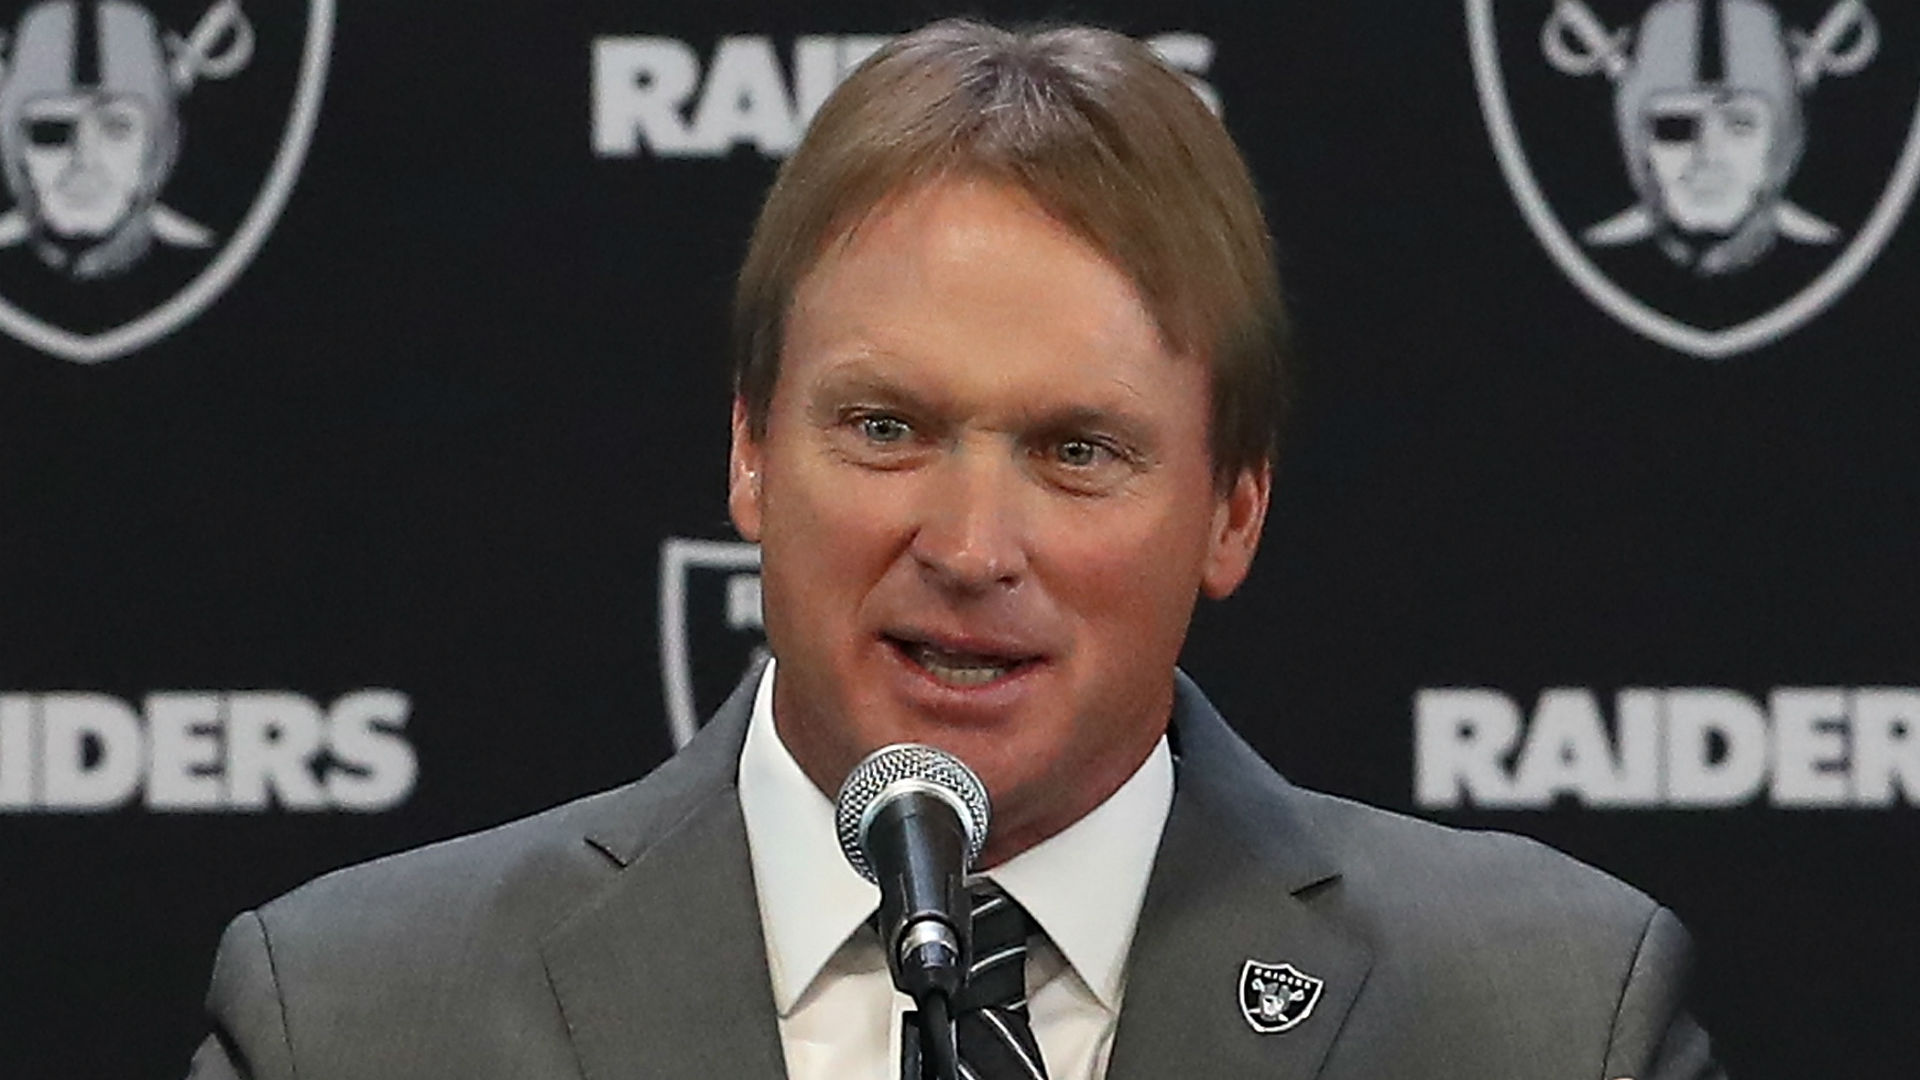 SN sources: Raiders to overhaul personnel department post-NFL Draft